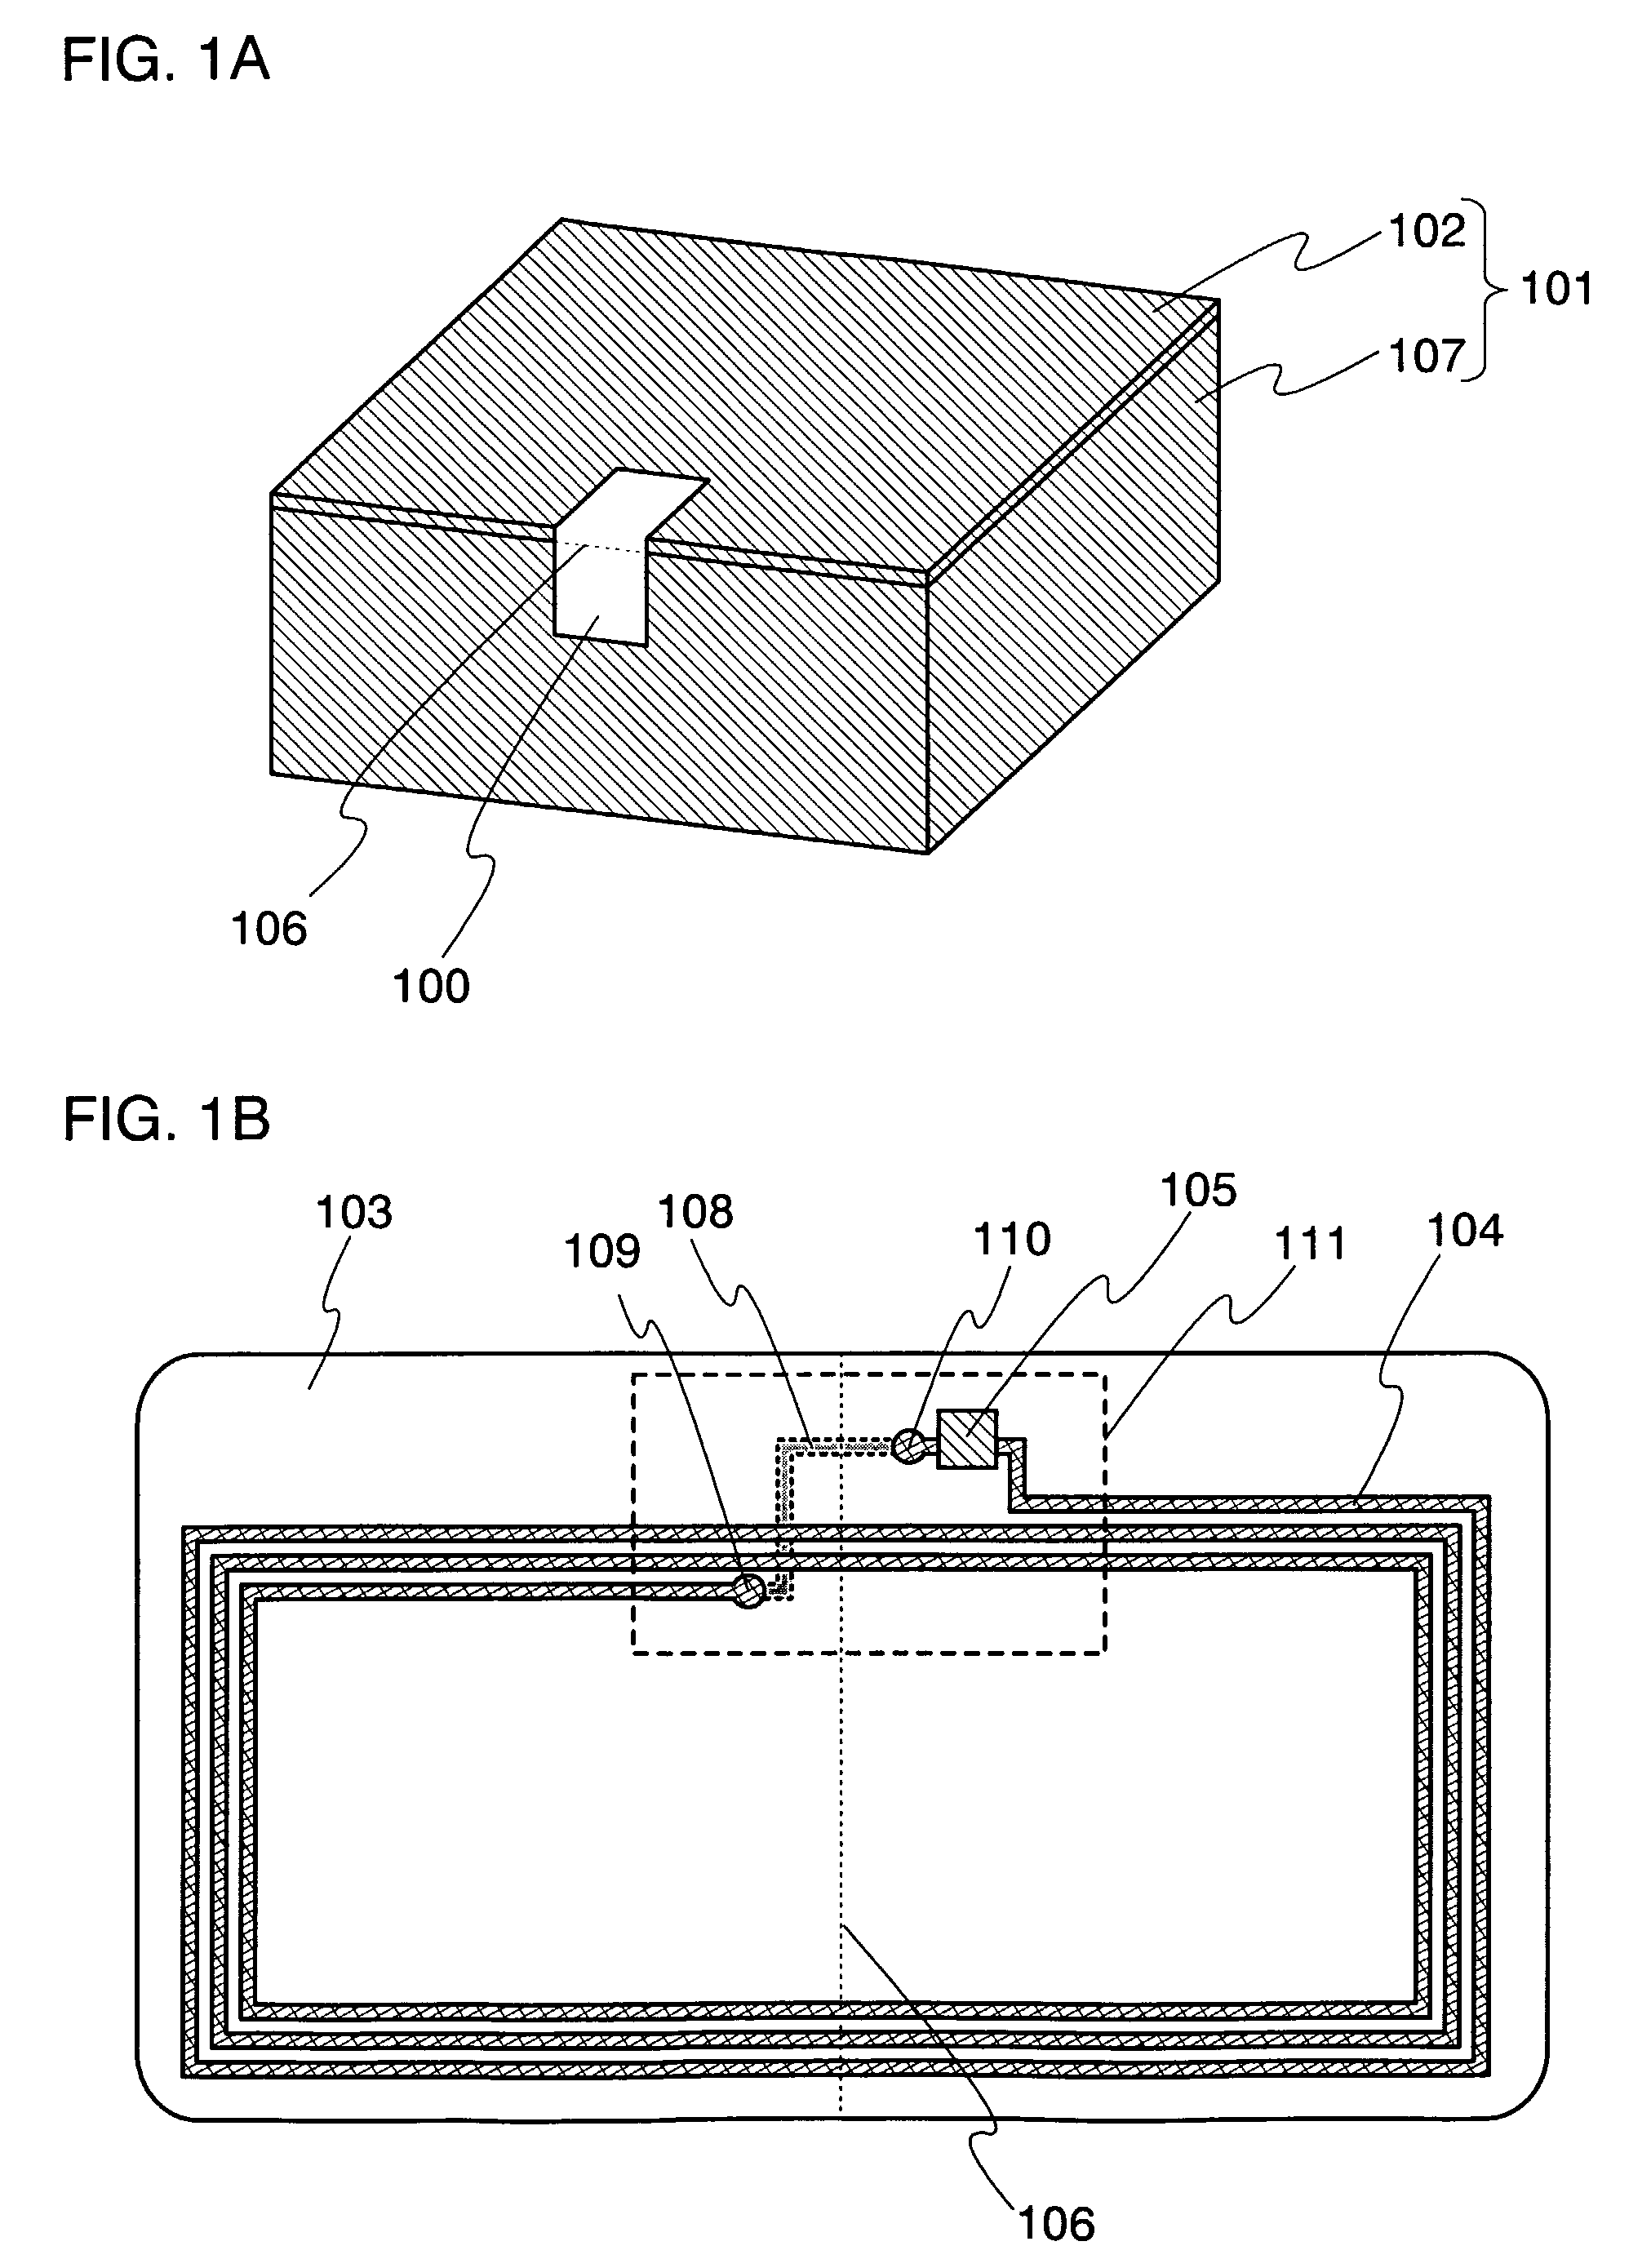 Semiconductor device with antenna and separating layer